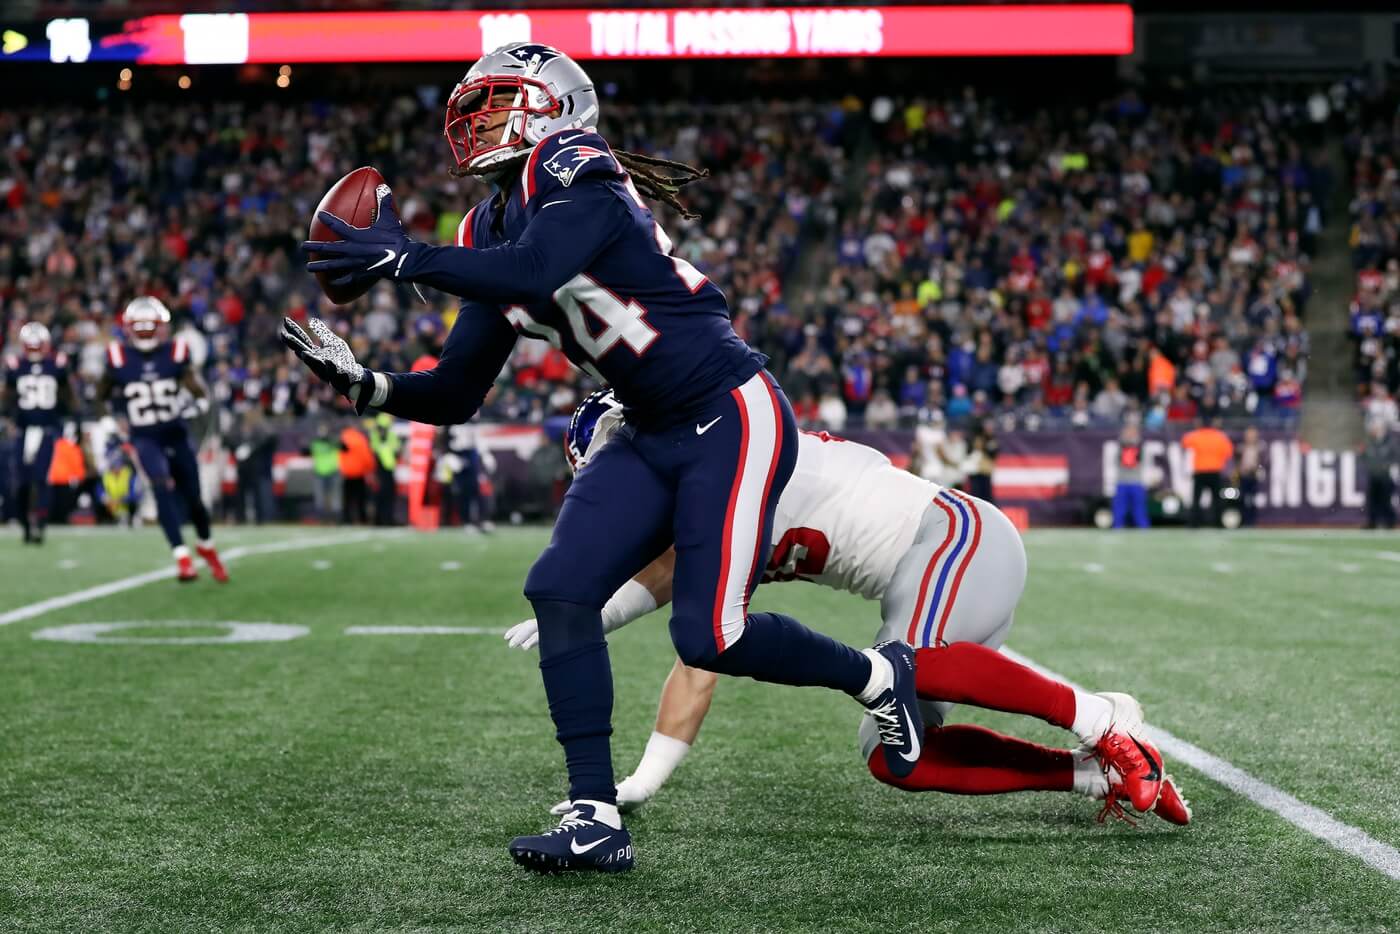 New England Patriots cornerback Stephon Gilmore (24) makes a catch in front of New York Giants tight end Garrett Dickerson (89) during the second half at Gillette Stadium.